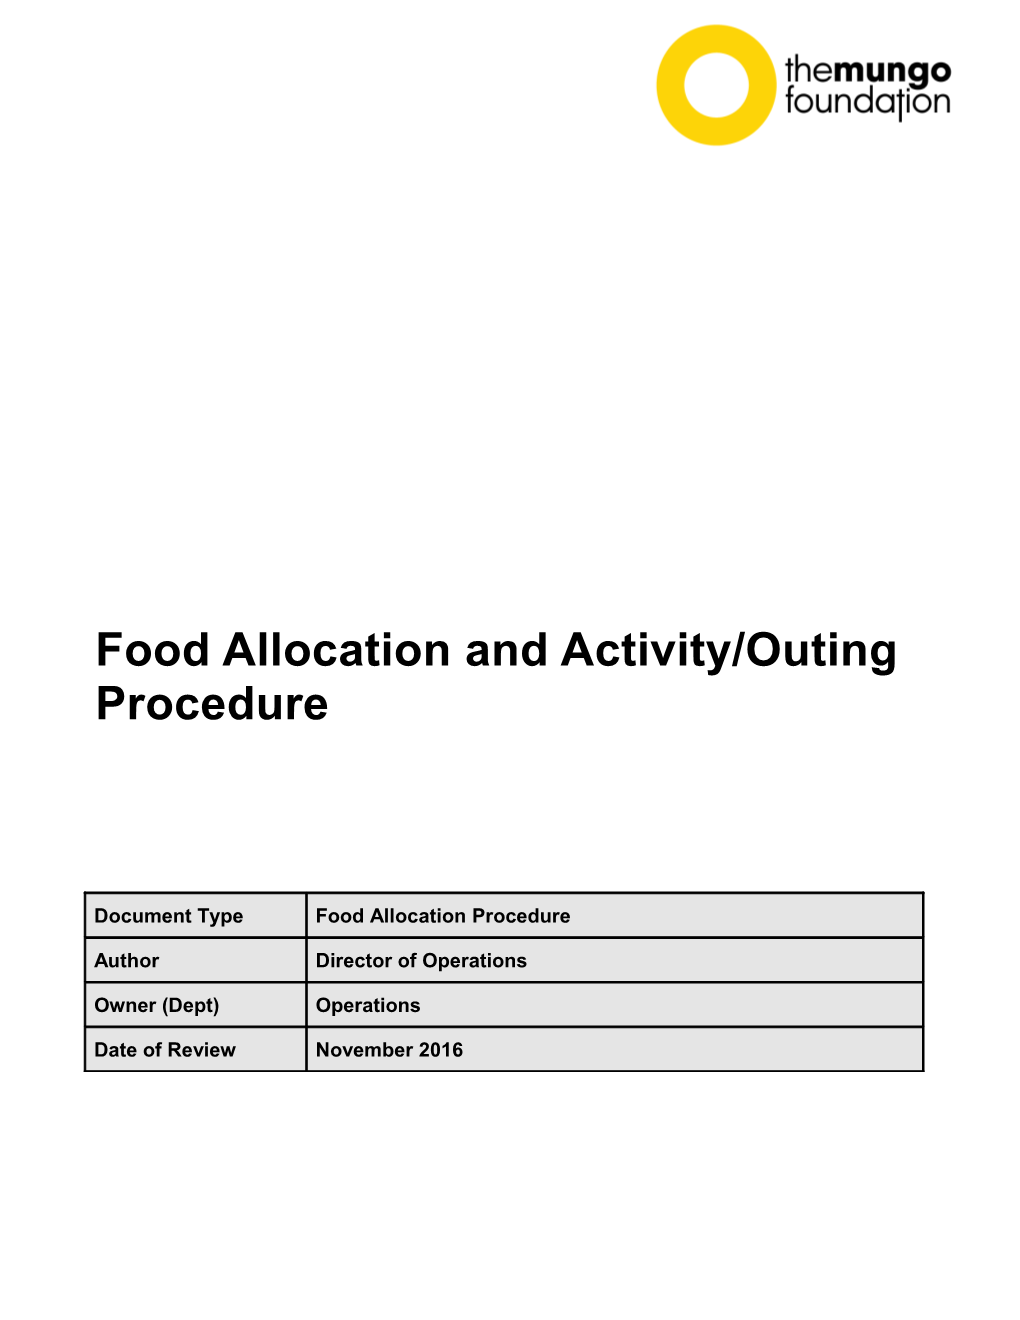 Food Allocationand Activity/Outing Procedure